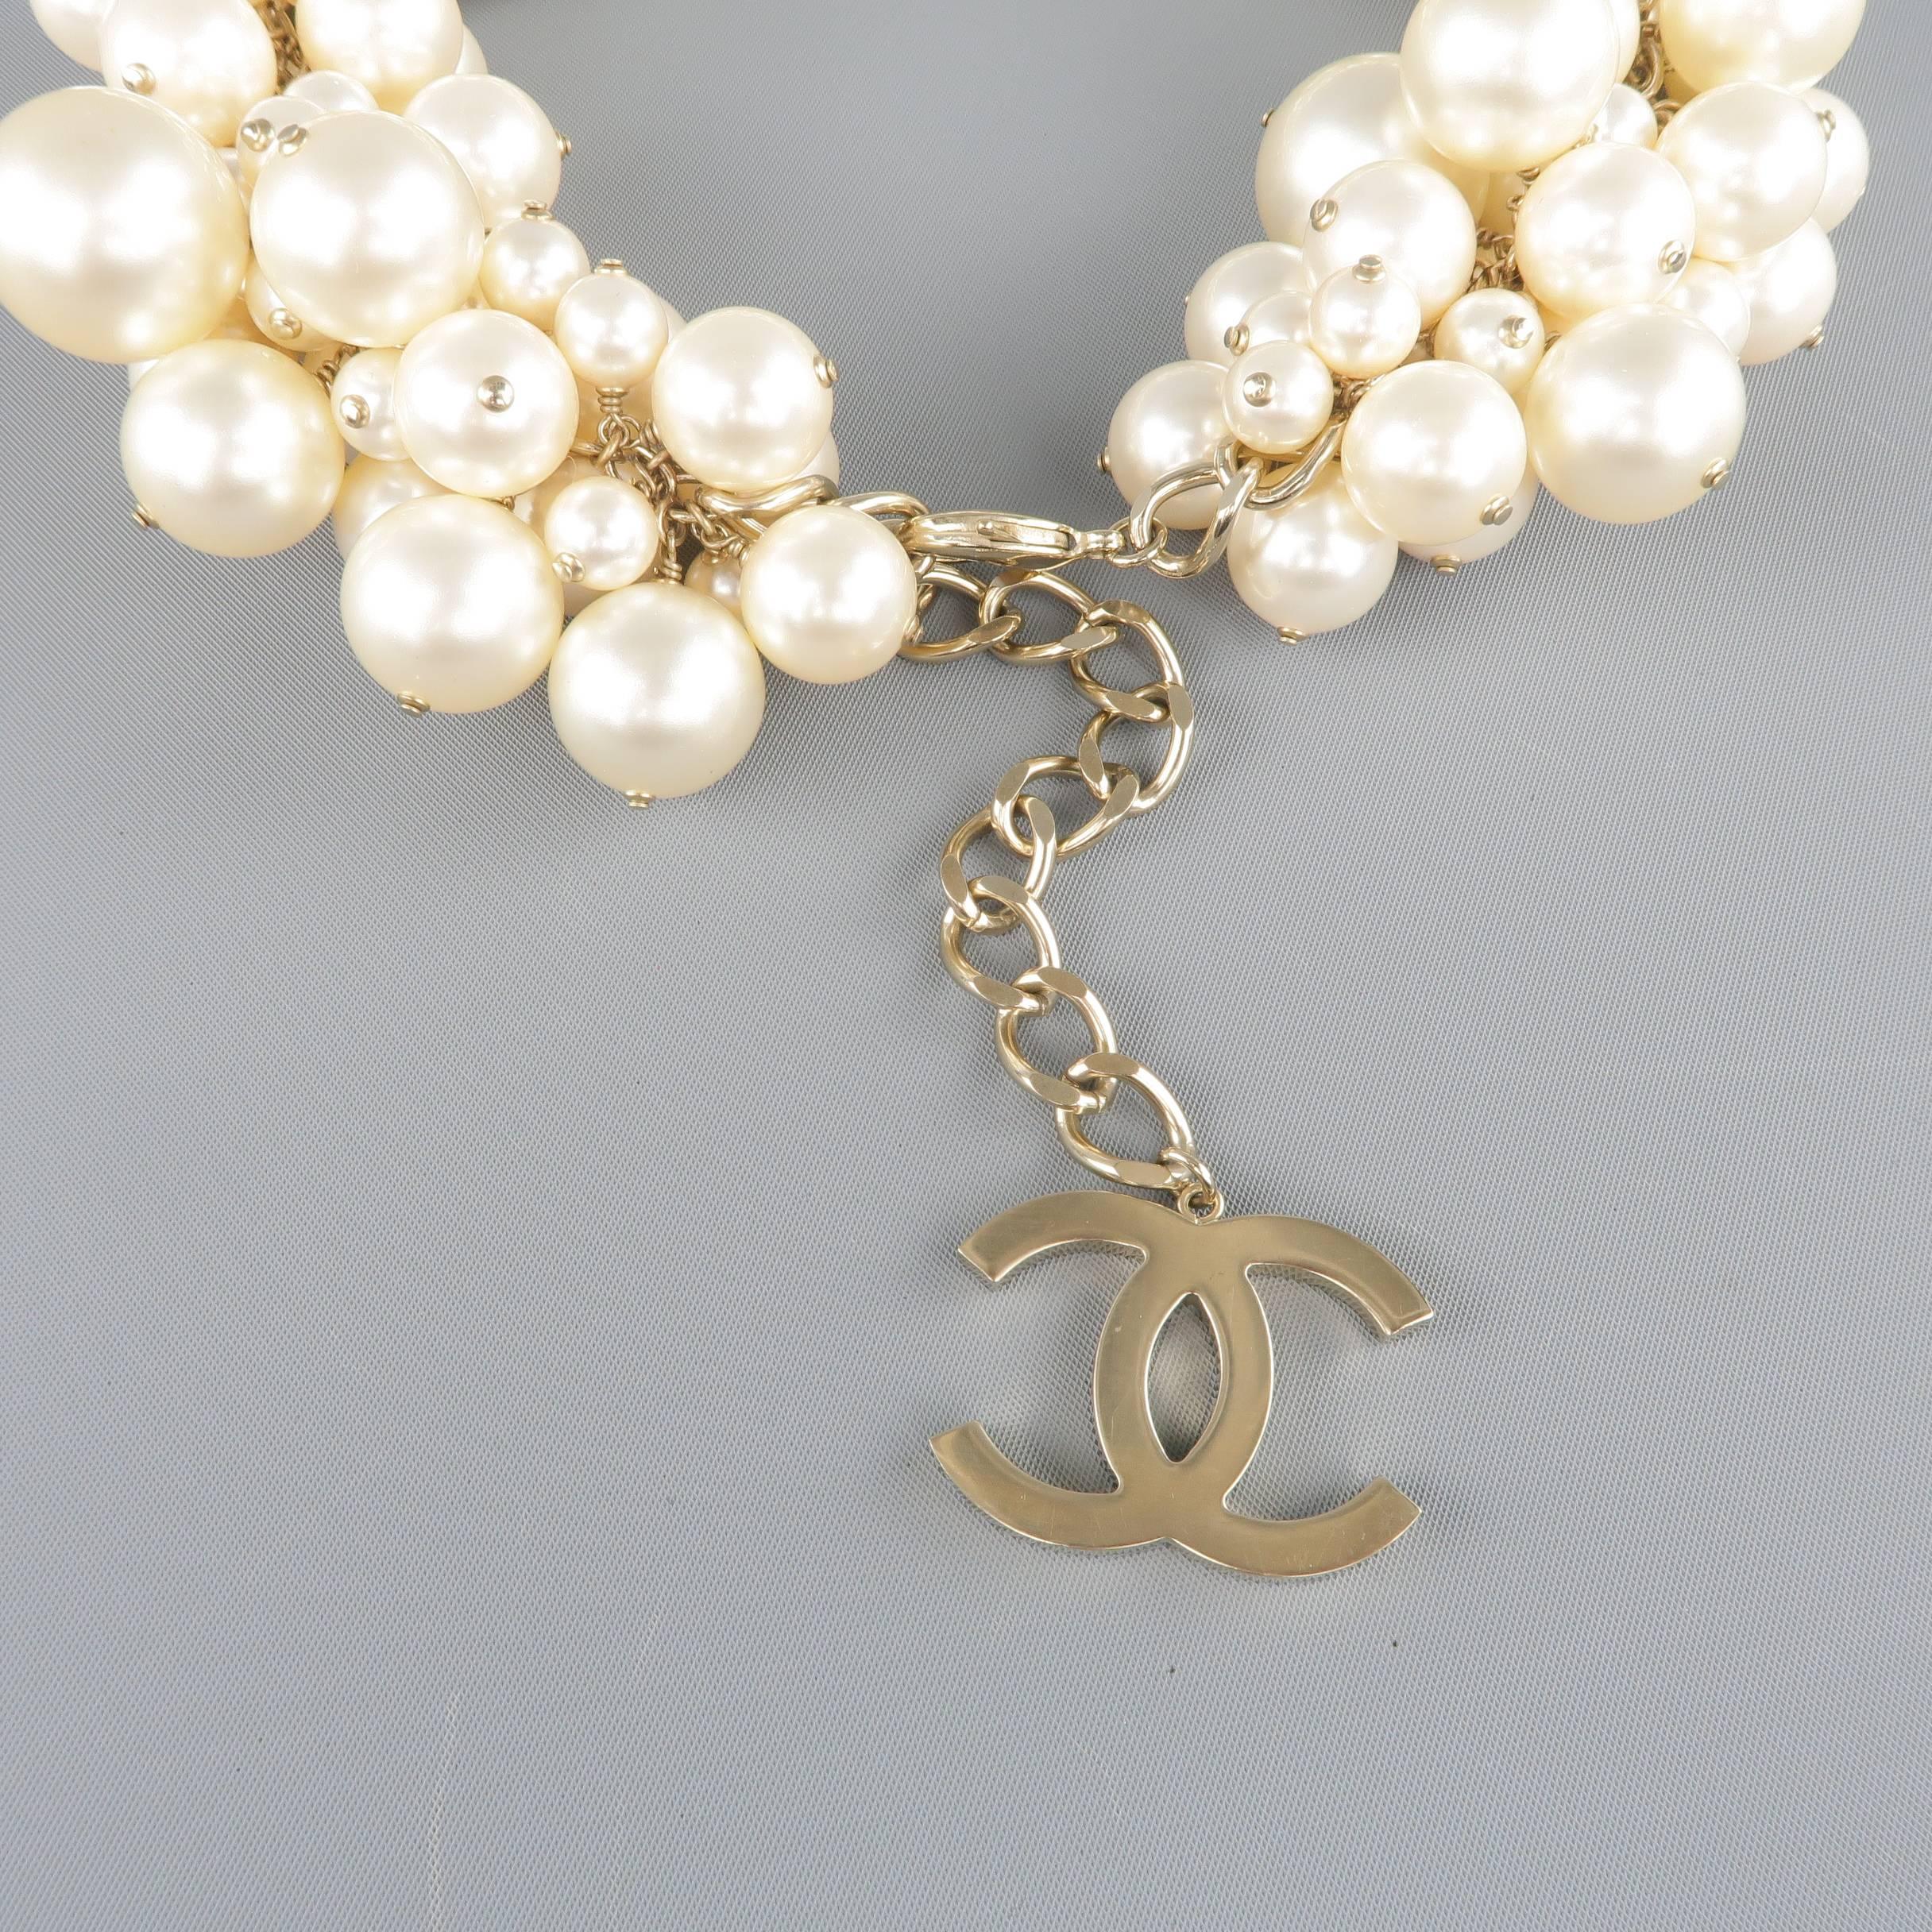 Iconic Chanel Spring Summer 2013 Collection runway necklace features a band of clustered oversized faux pearls on a light gold tone chain with CC logo charm. Scuff on pearl shown in detail shot. Otherwise excellent condition.  As-is. Includes